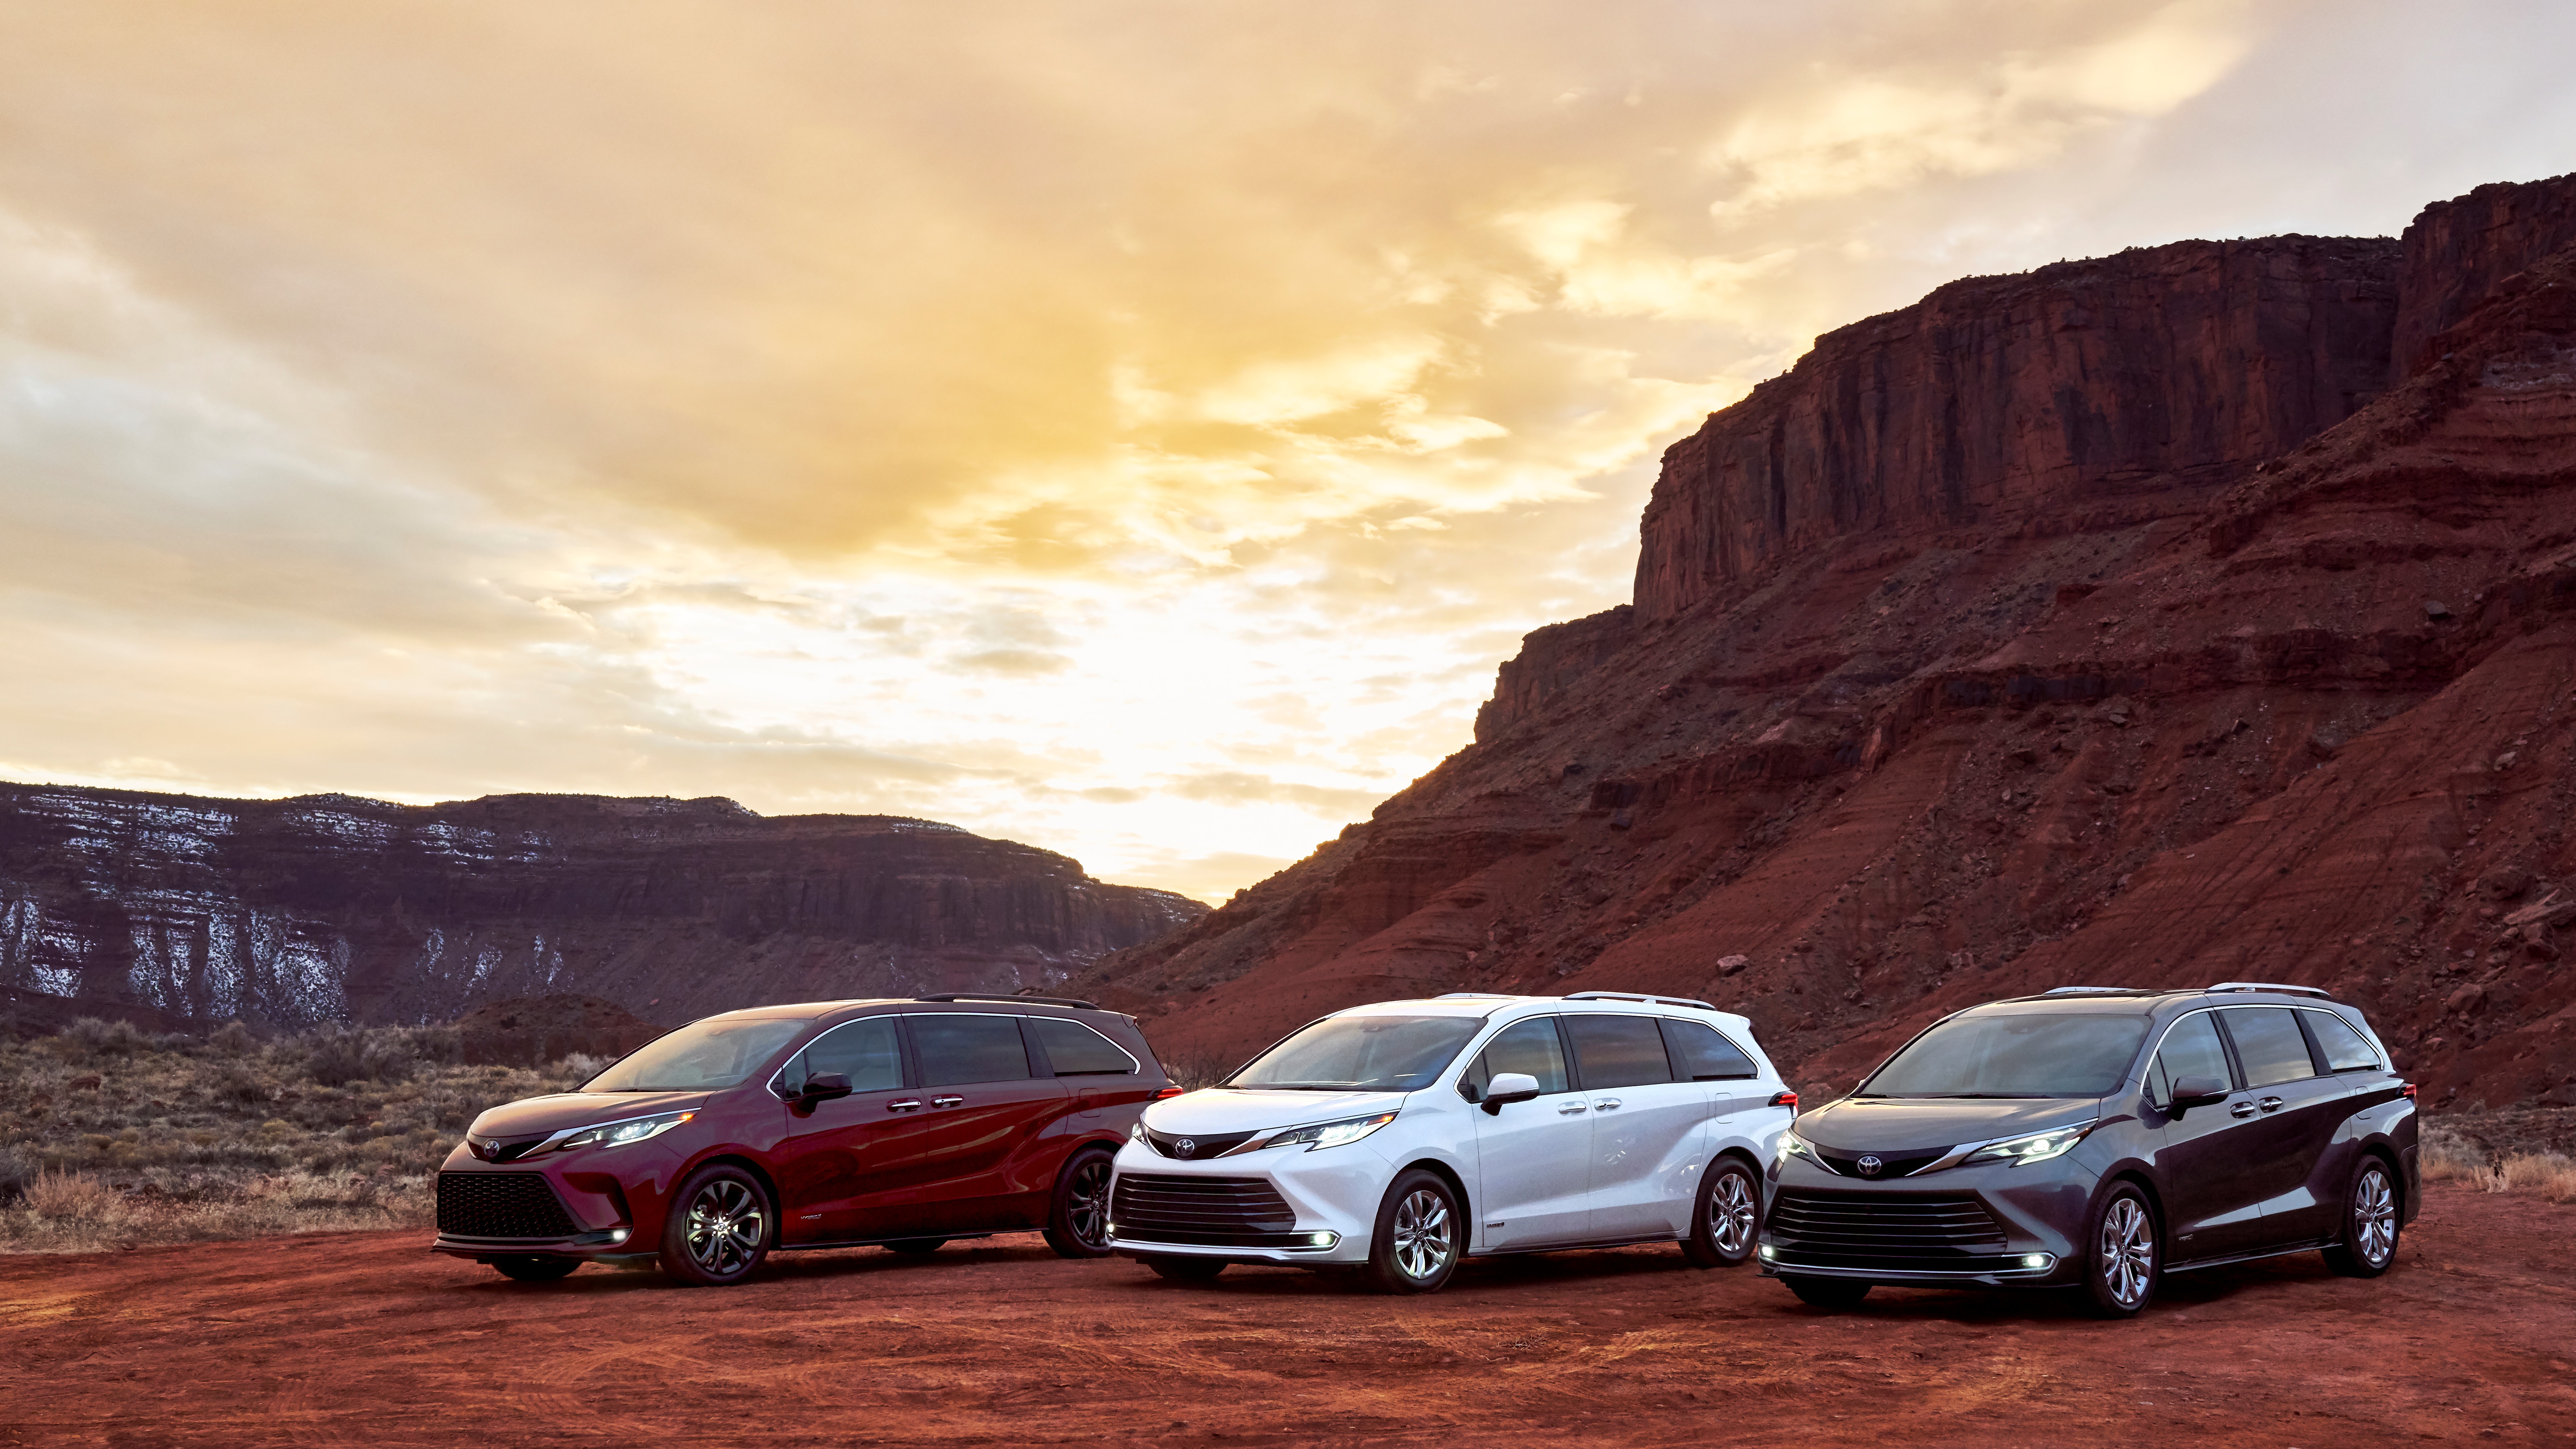 Toyota Spring Product Showcase Brings New Sienna and Venza